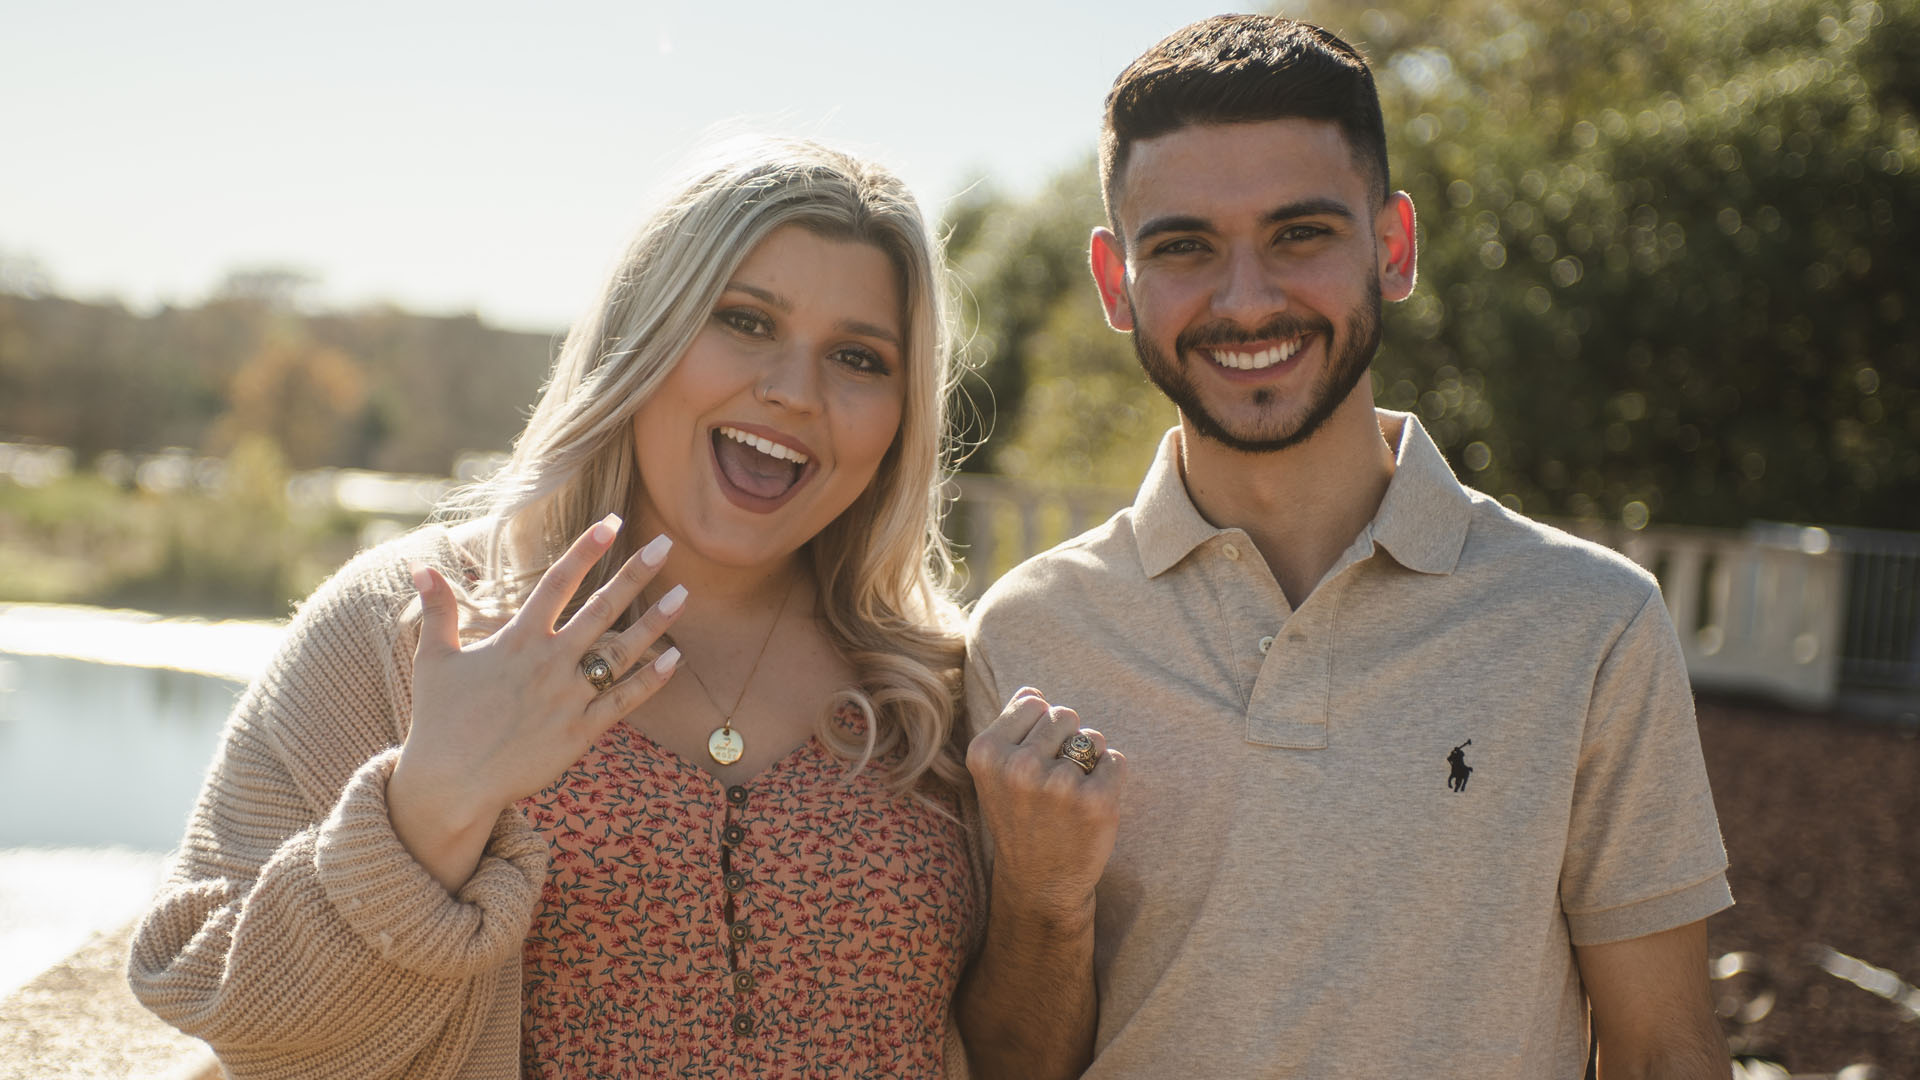 photo of two people smiling with rings on